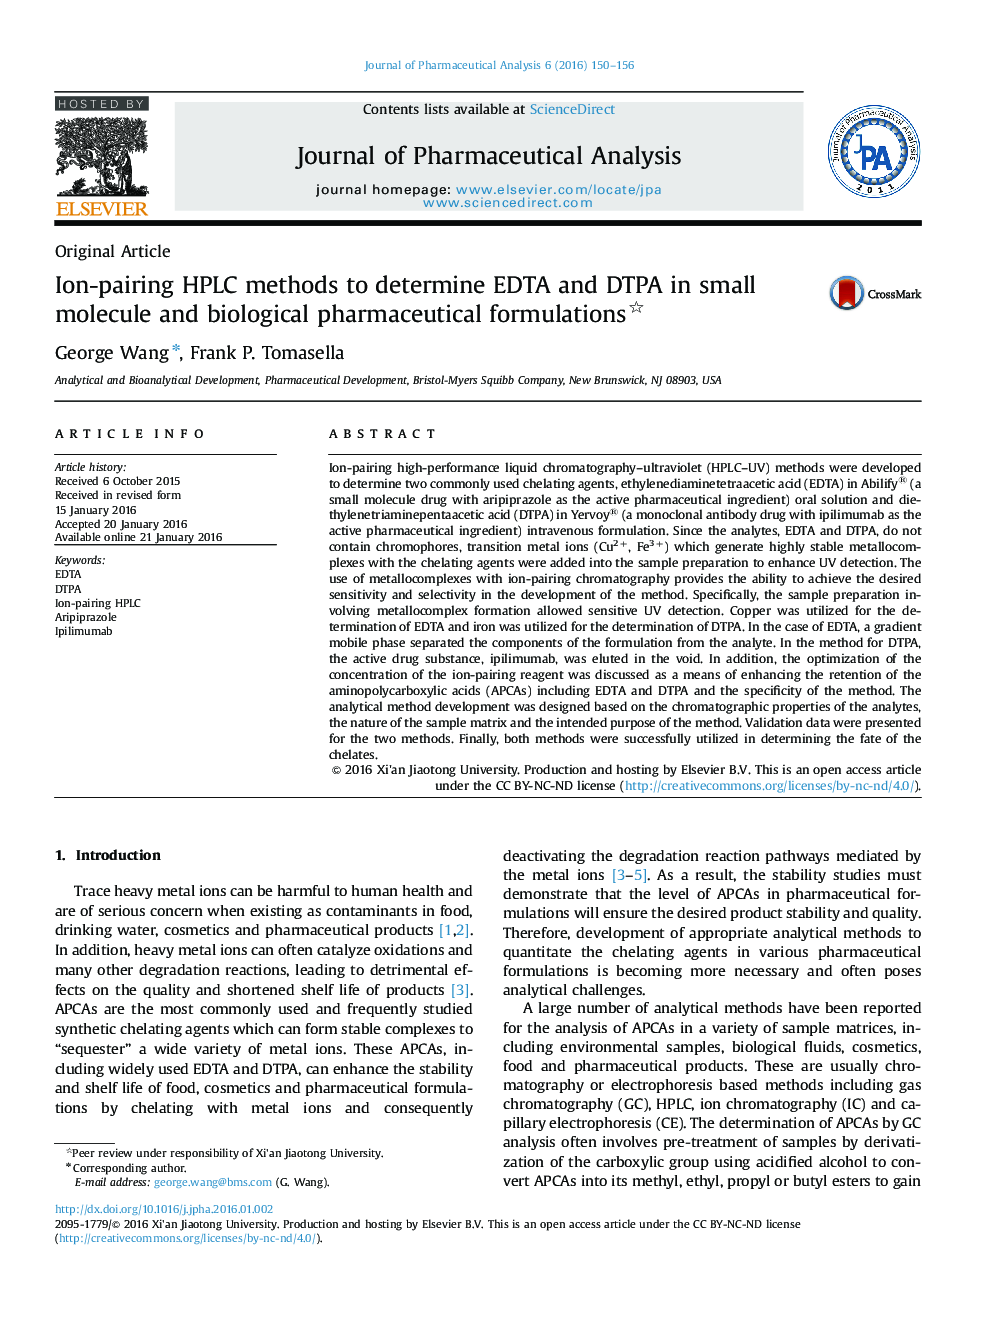 Ion-pairing HPLC methods to determine EDTA and DTPA in small molecule and biological pharmaceutical formulations 